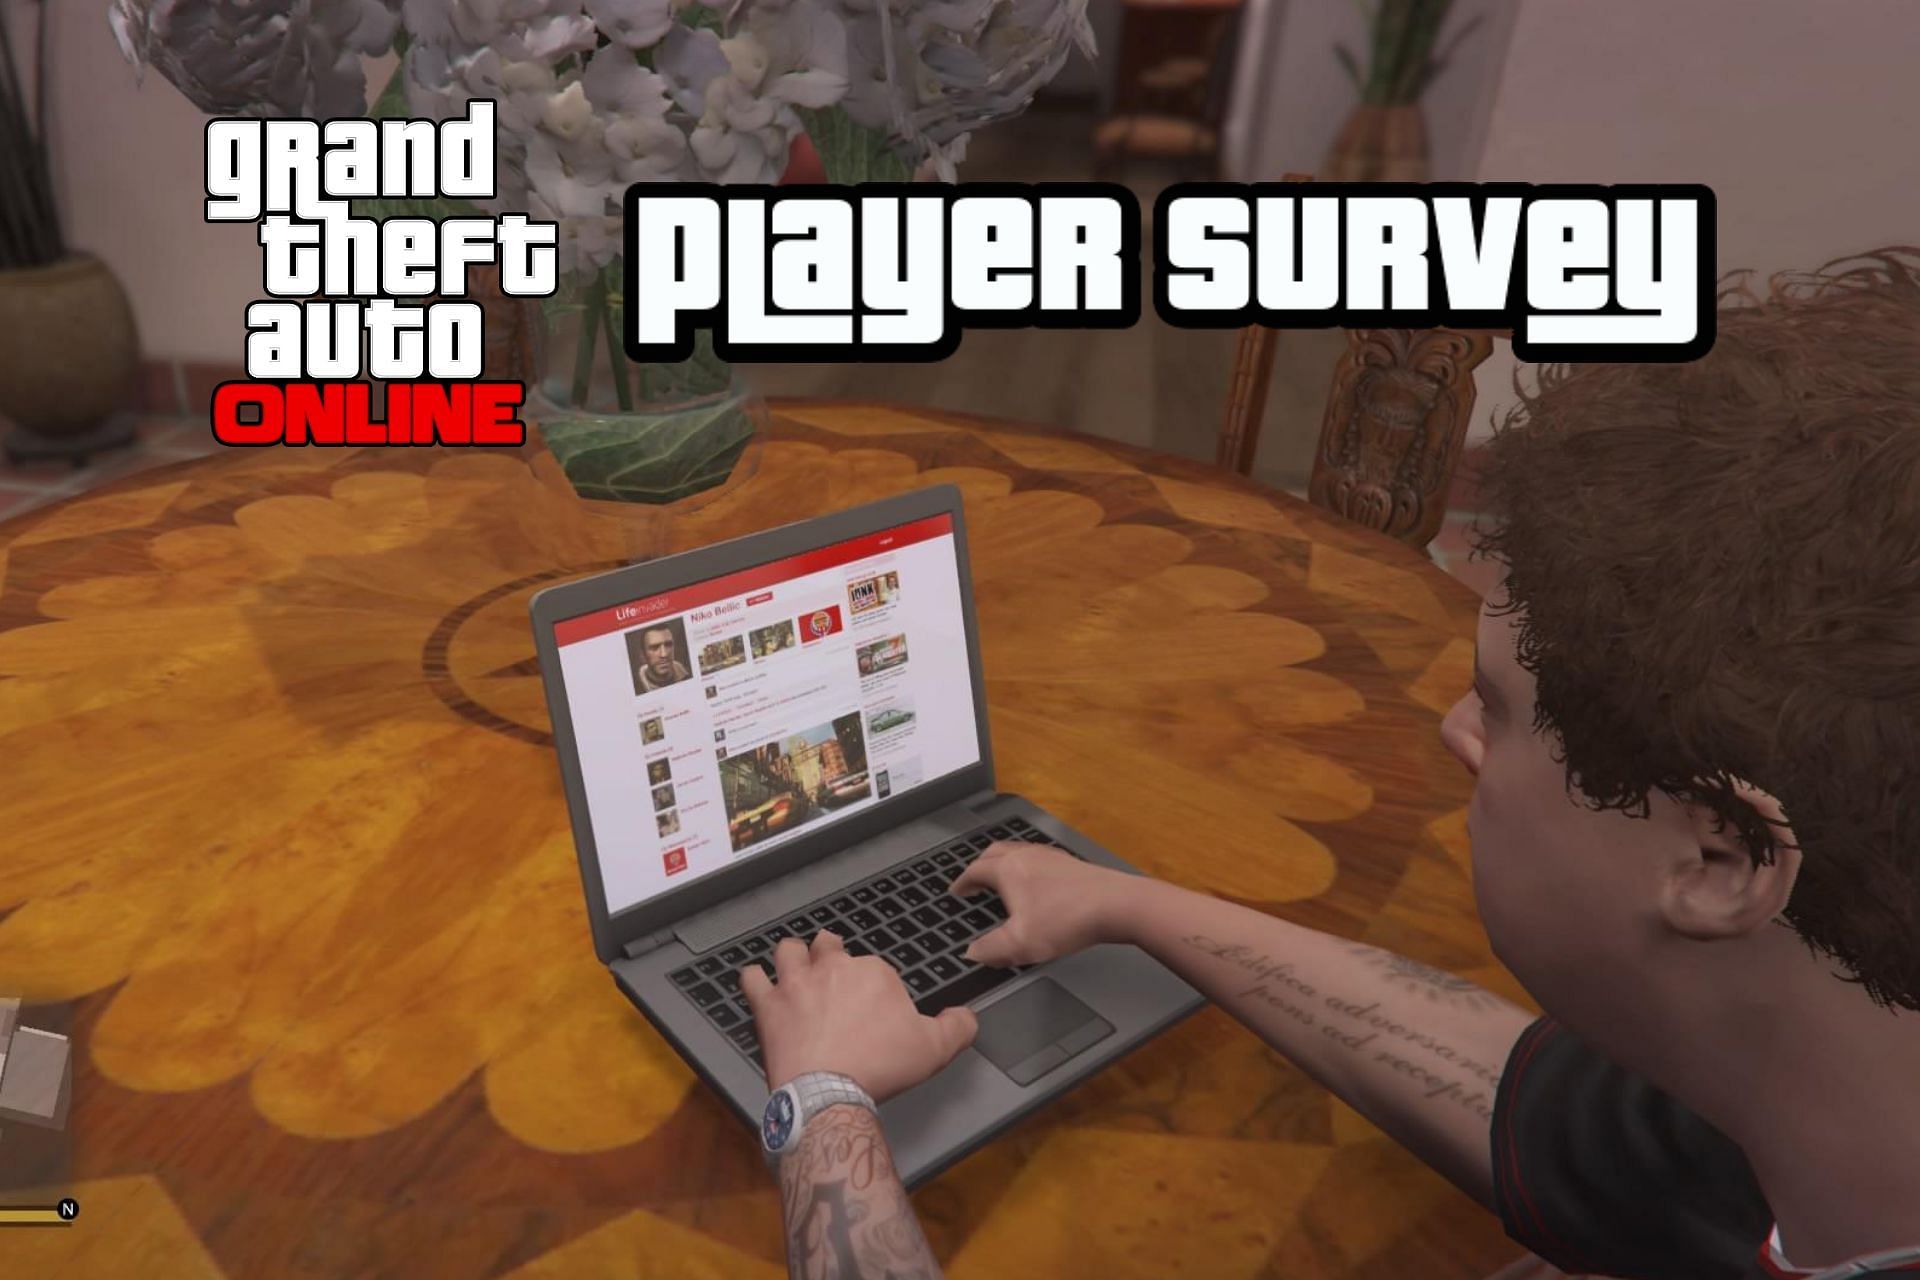 GTA Online players can still participate in the survey and earn rewards (Image via Reddit)